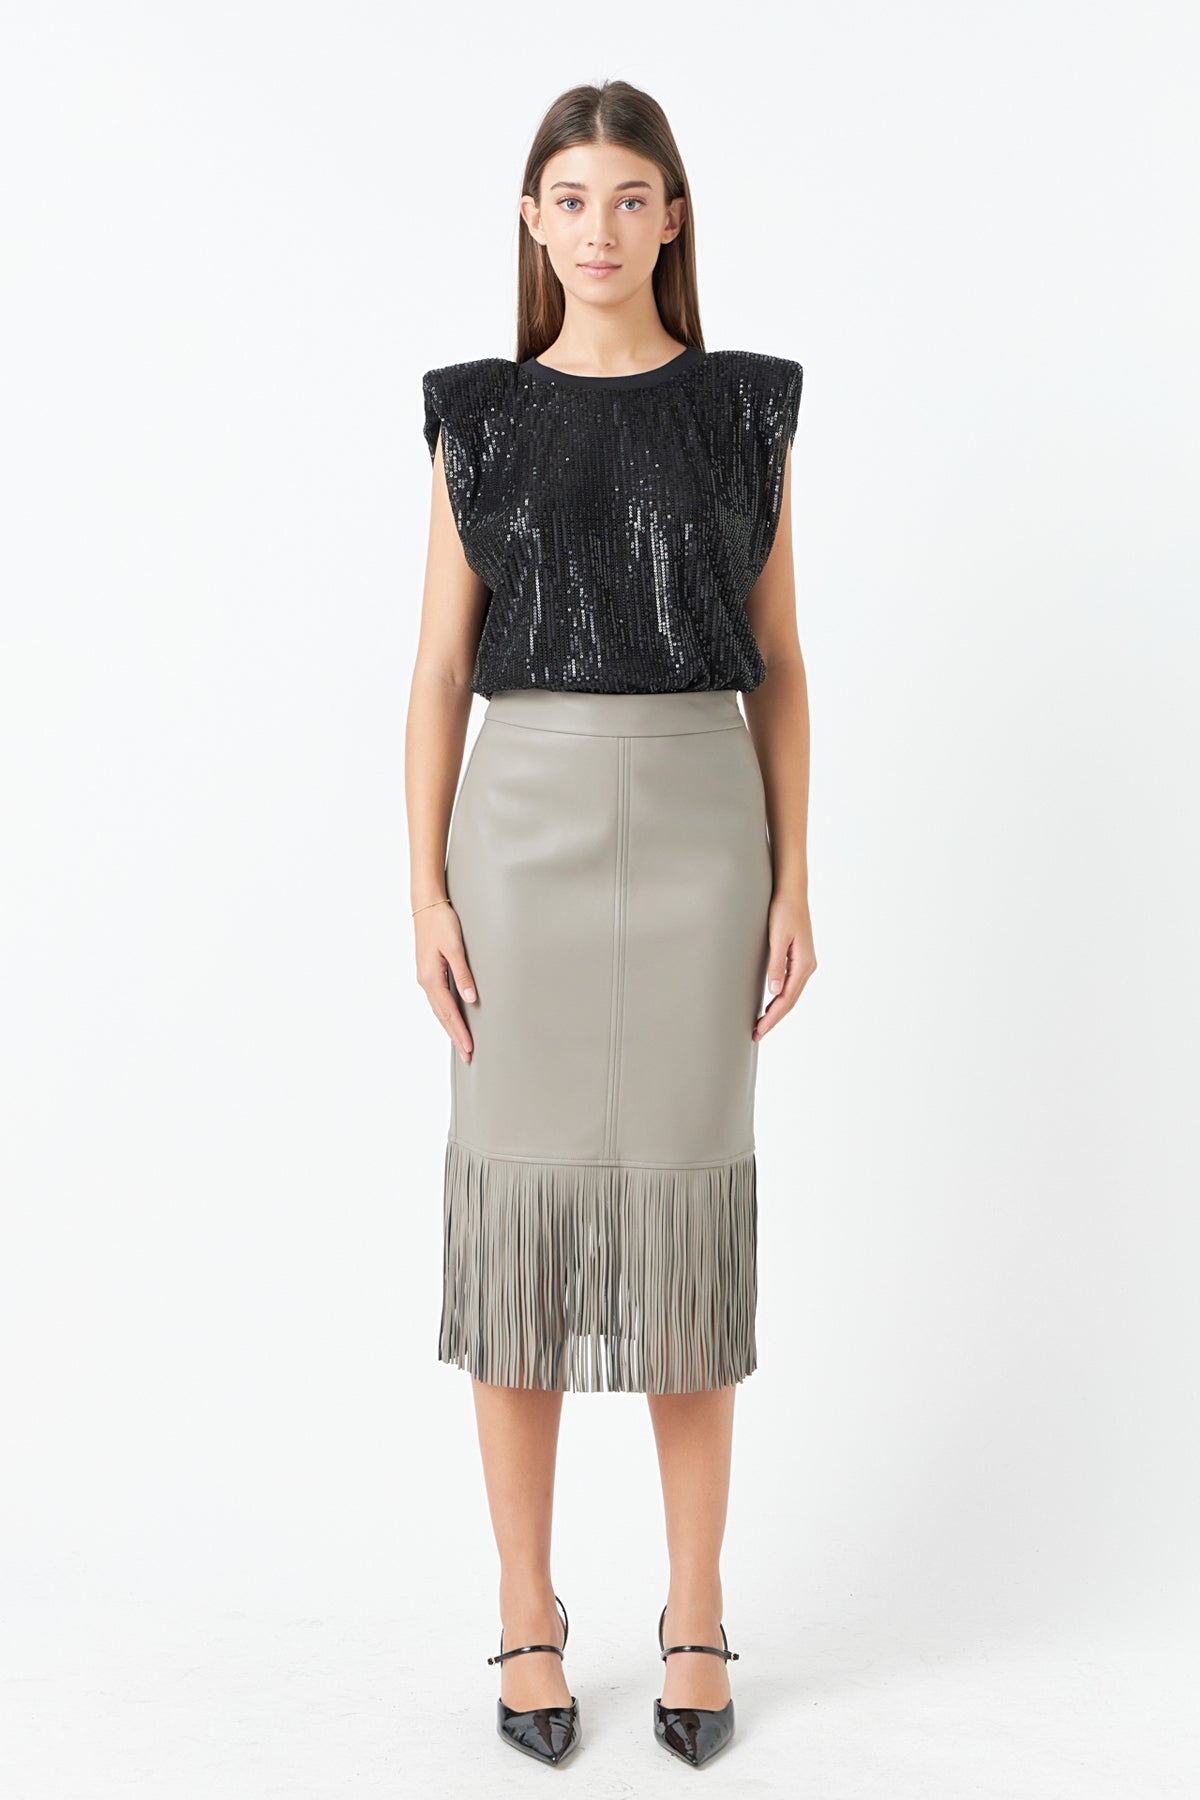 ENDLESS ROSE - PU Fringe Pencil Midi Skirt - SKIRTS available at Objectrare